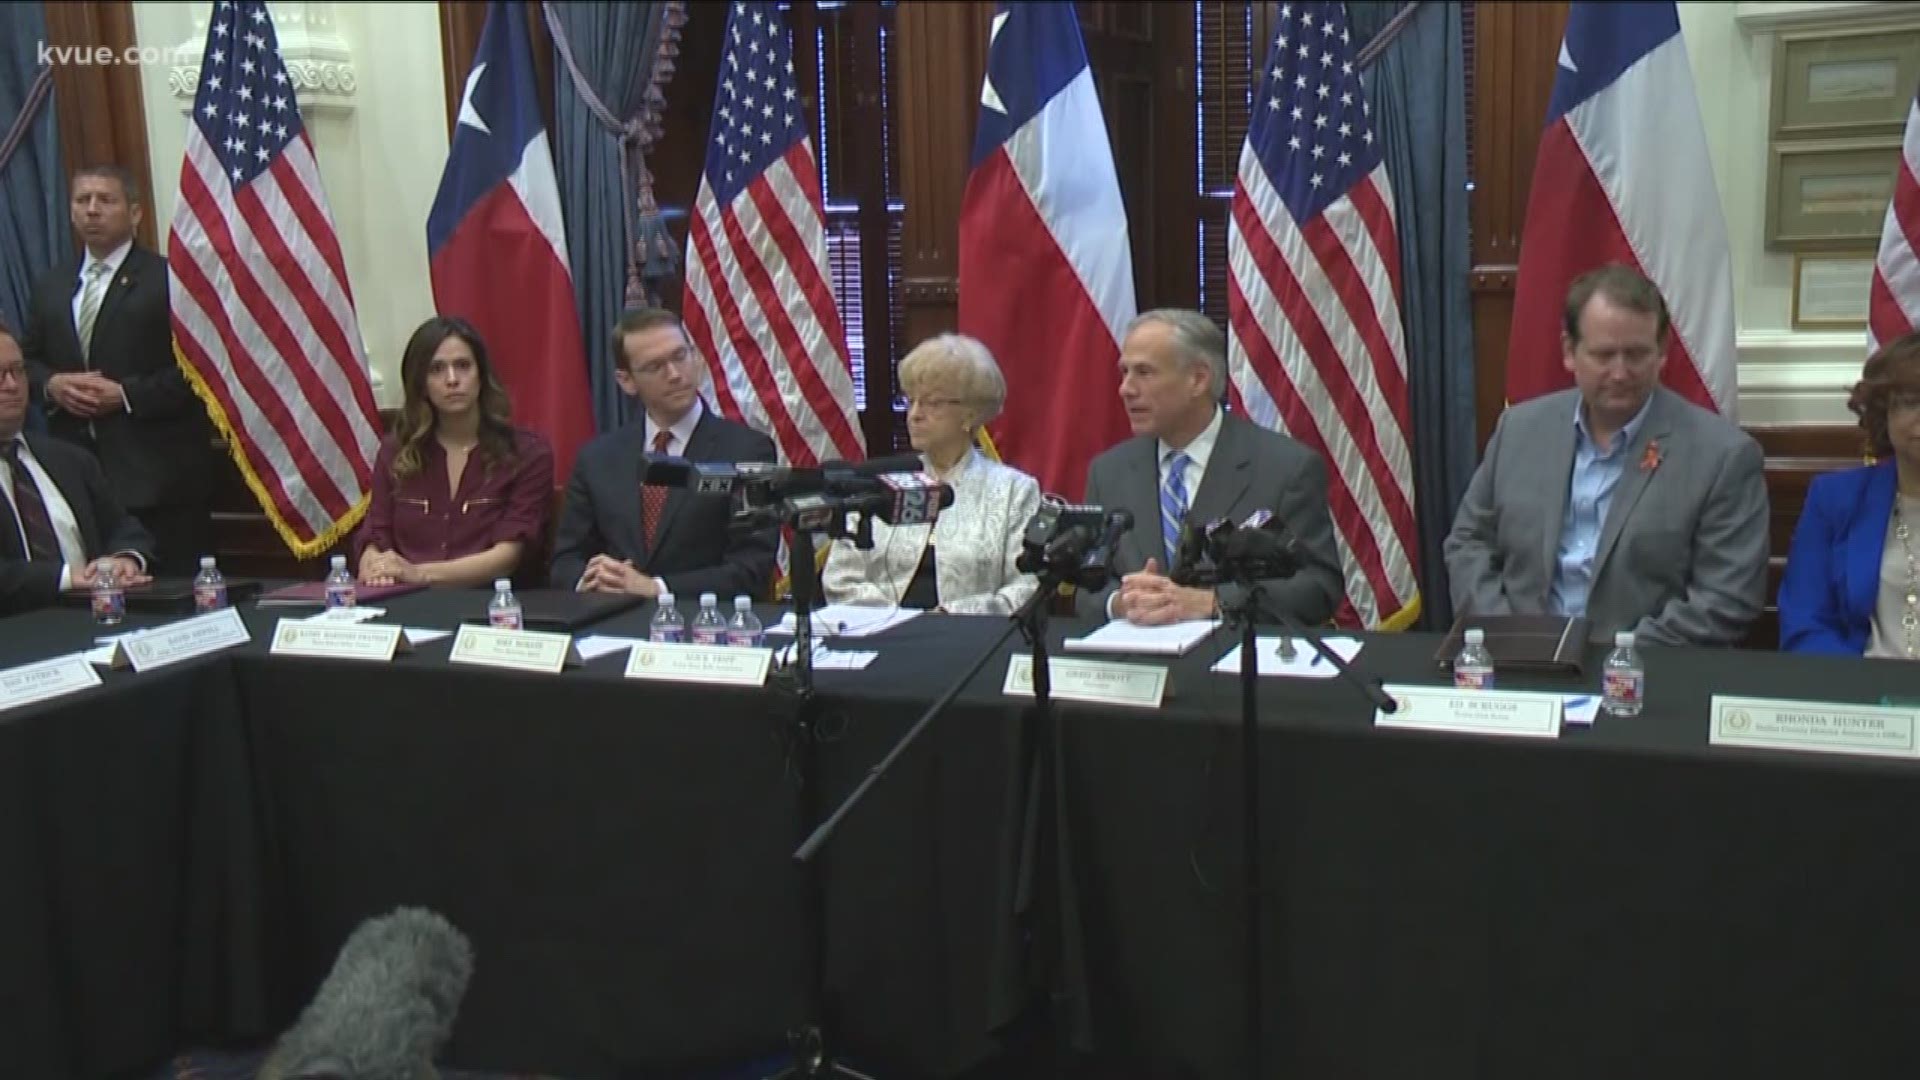 Texas Democrats said they want answers about that list the former Secretary of State made questioning the citizenship status of nearly 100,000 registered voters.